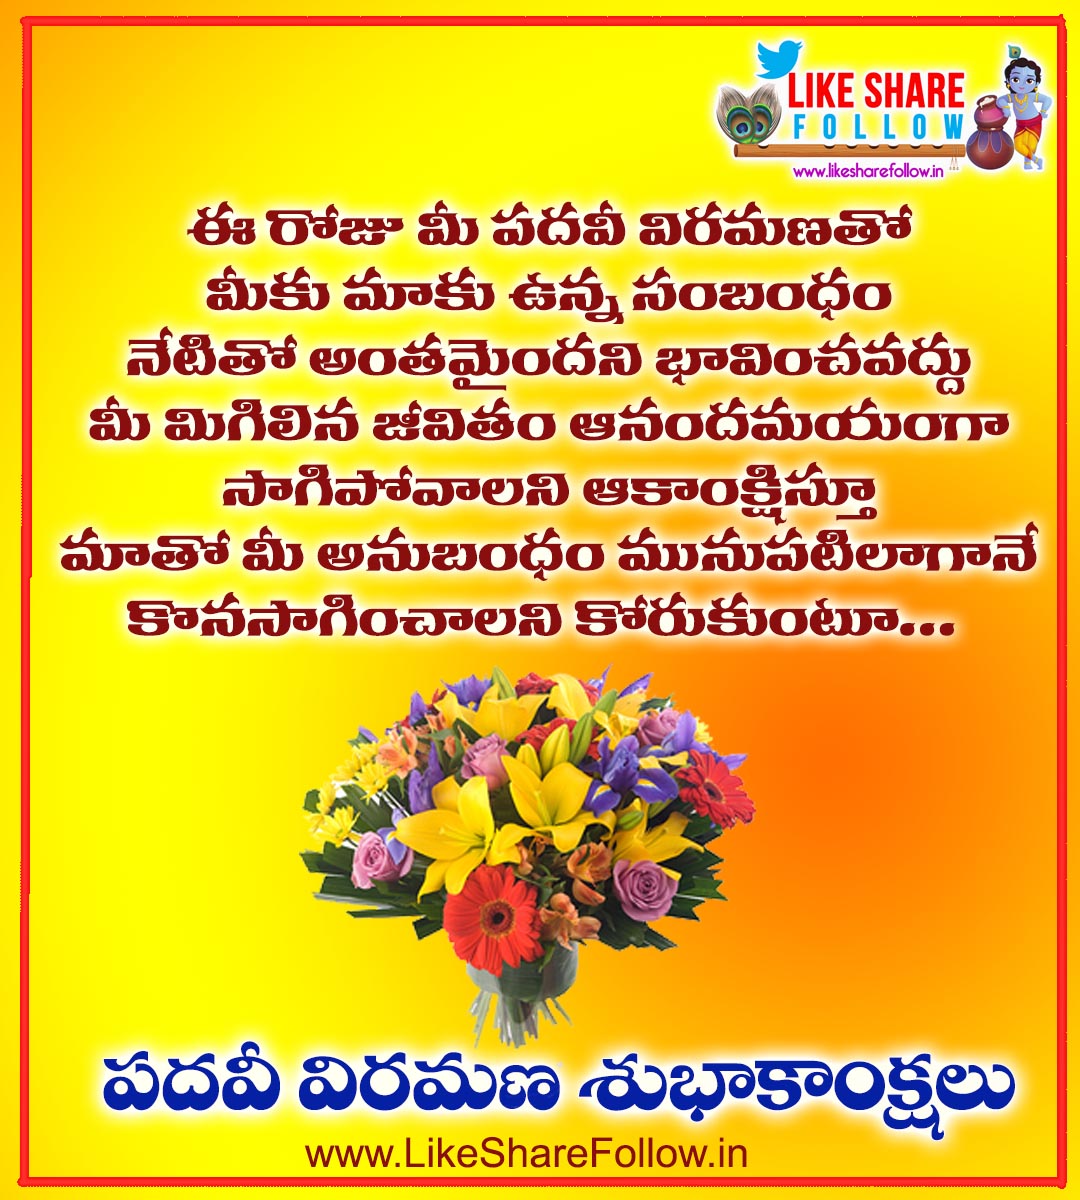 Retirement wishes in telugu for father | Like Share Follow